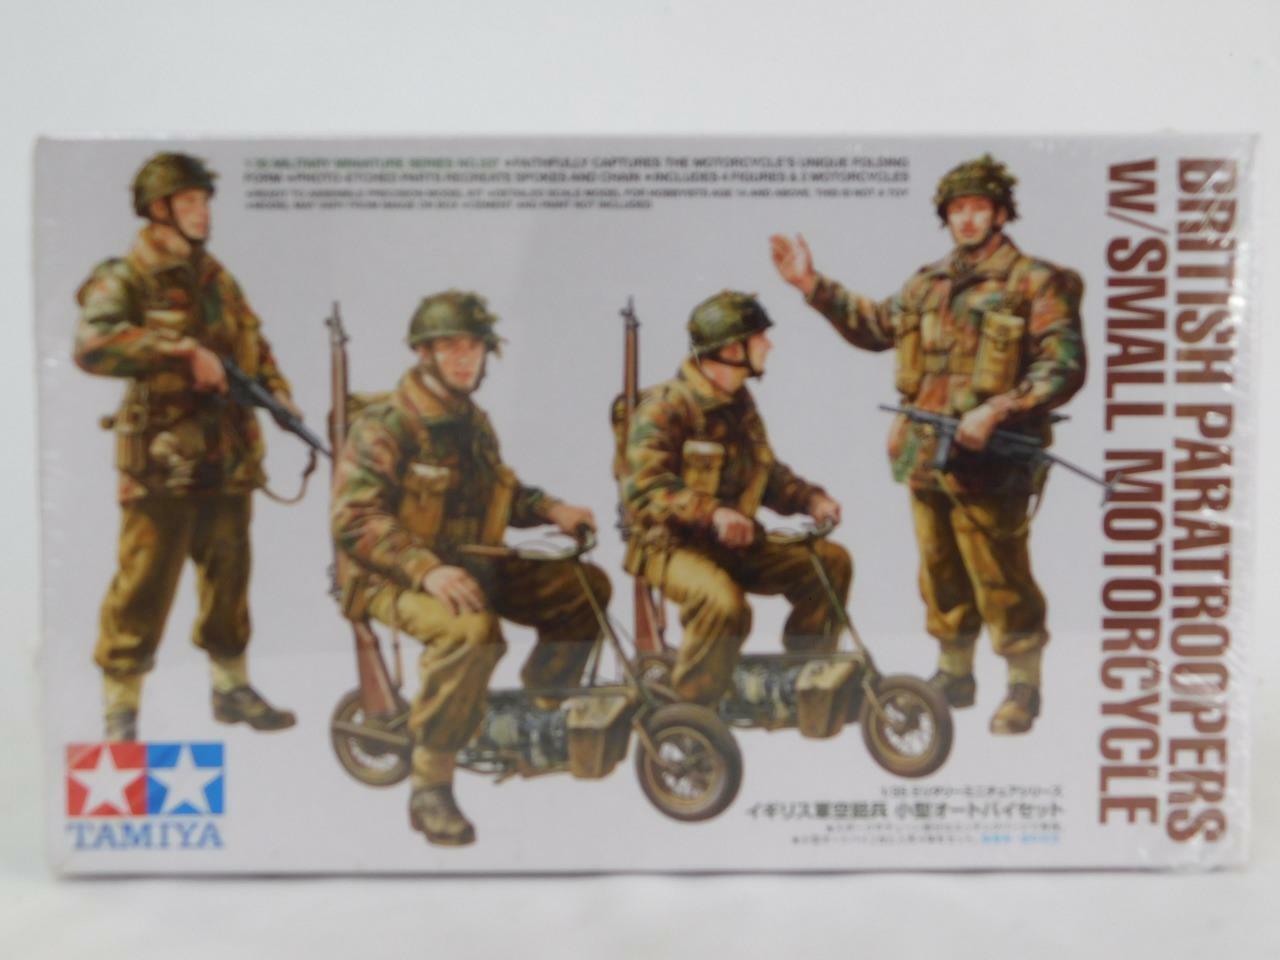 1/35 Tamiya British Paratroopers w/ Small Motorcycles Plastic Model Figures Kit